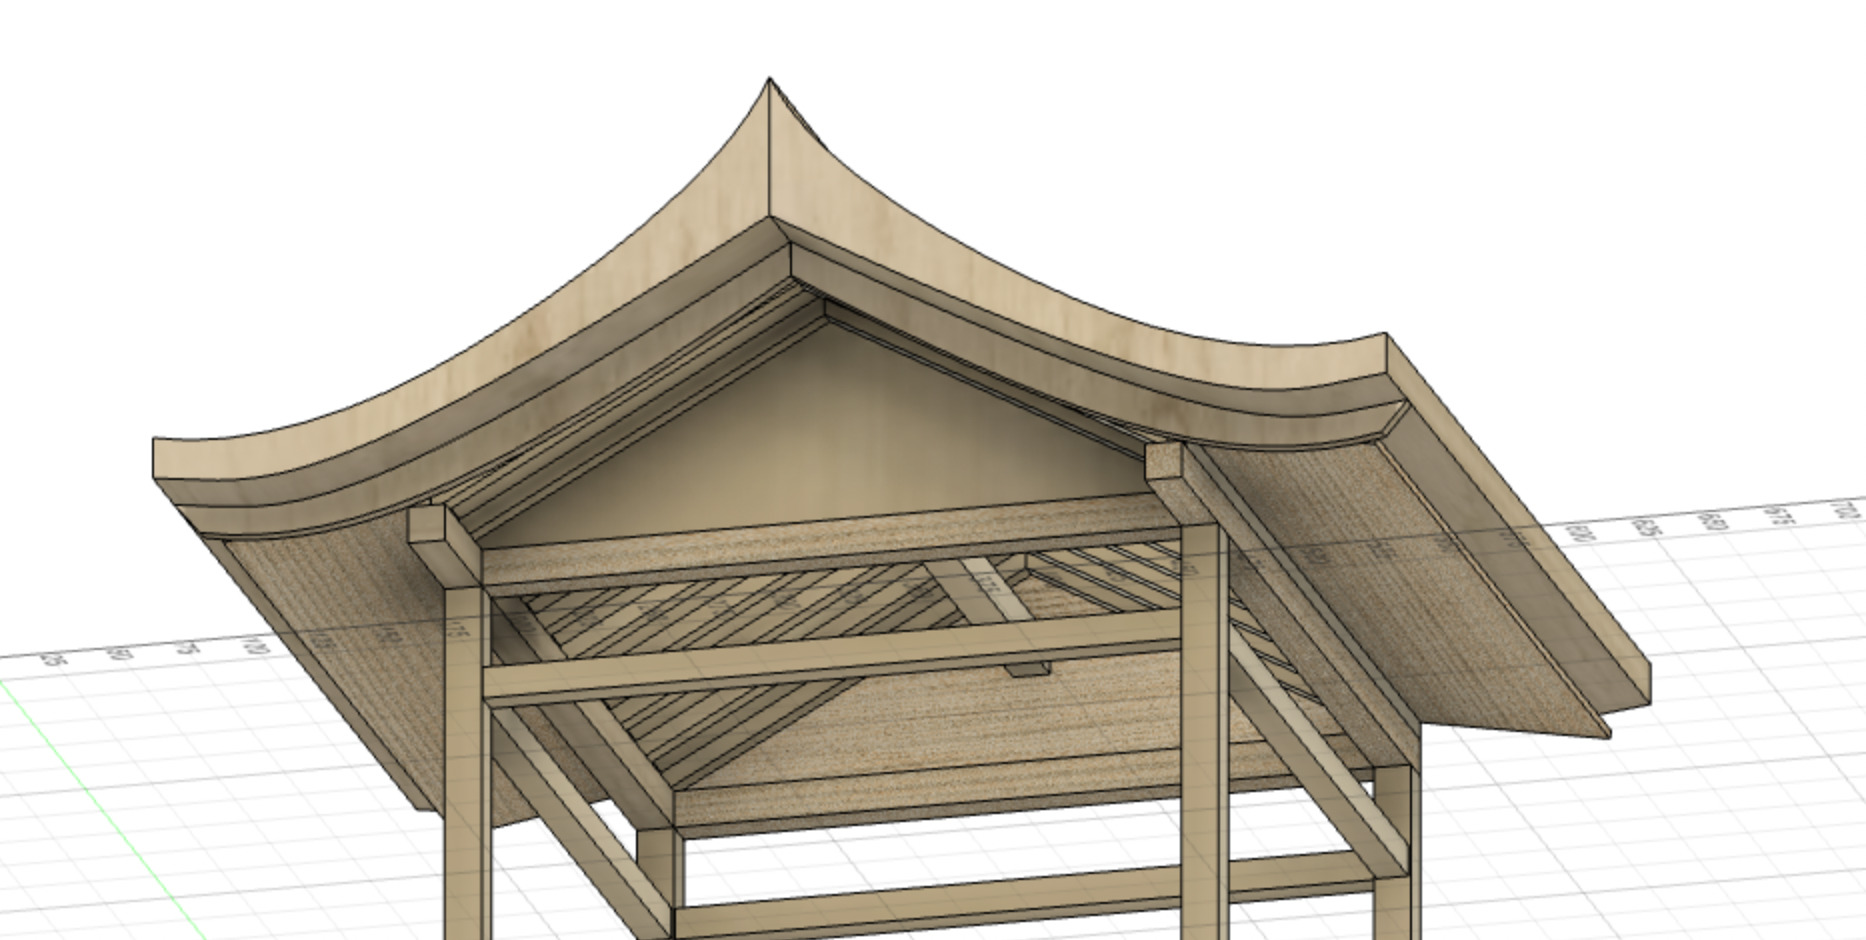 noh stage model screenshot in fusion 360